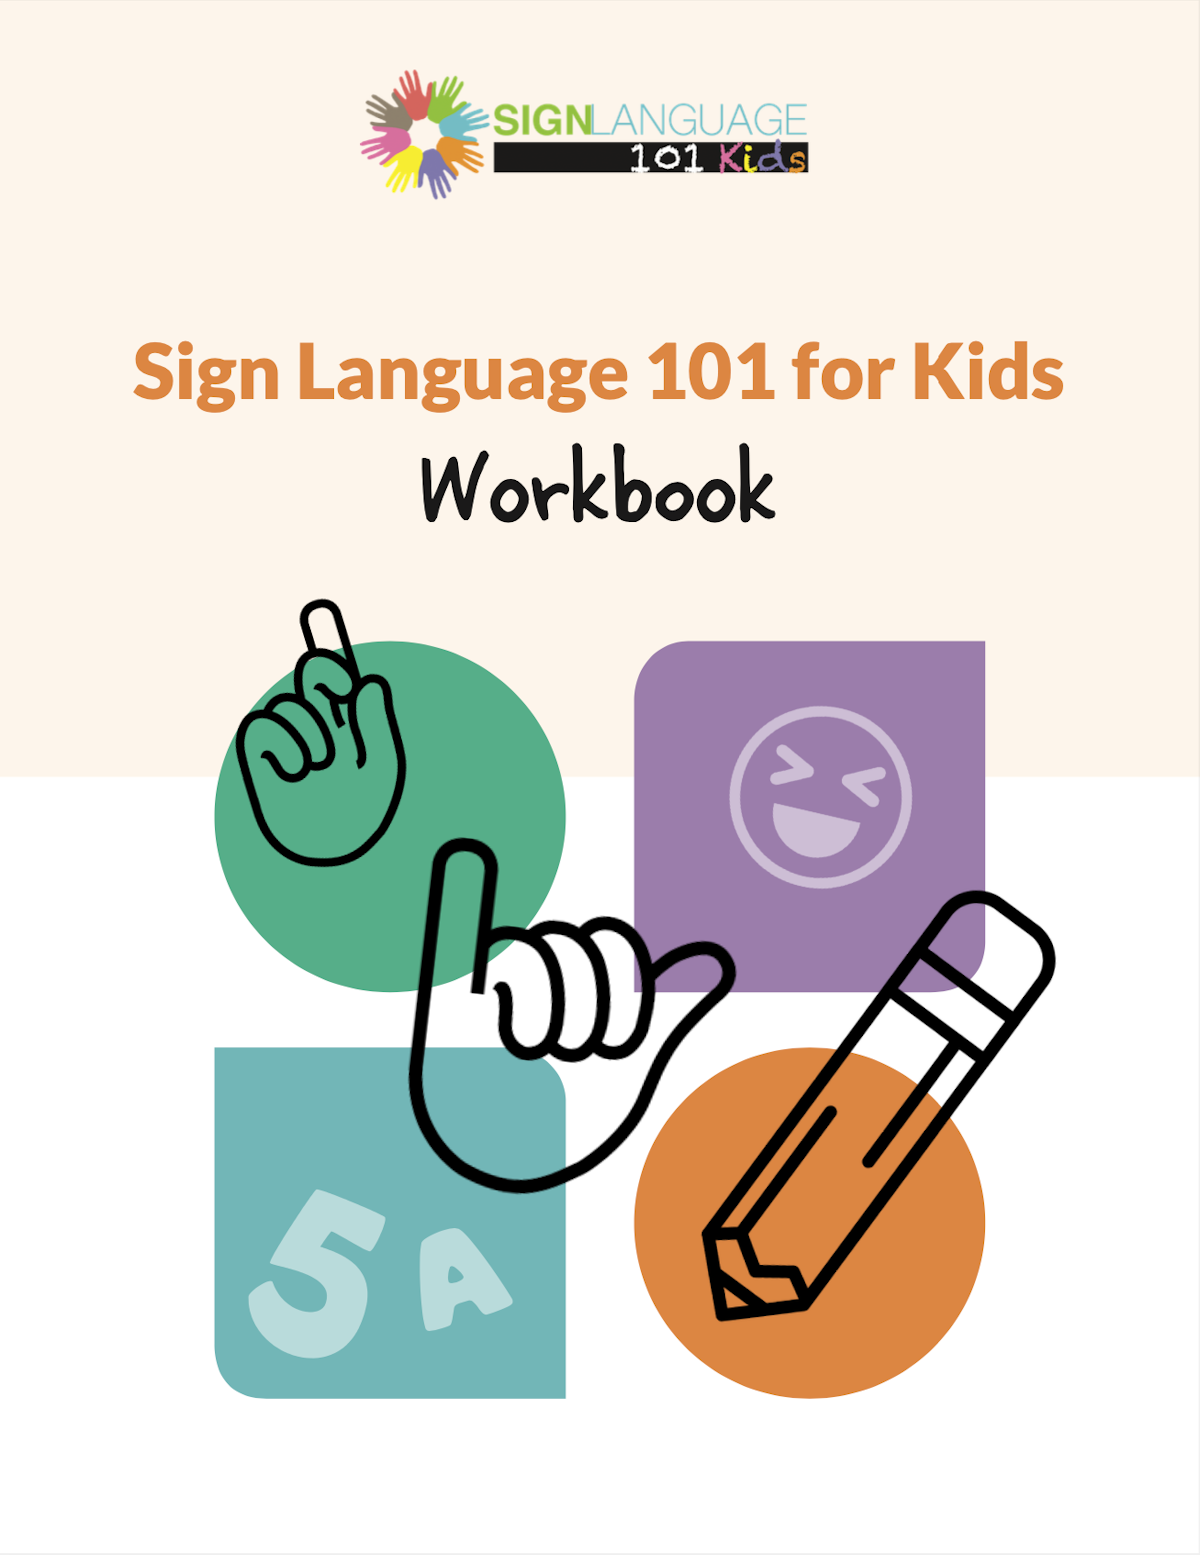 Sign Language 101 for Kids course workbook cover